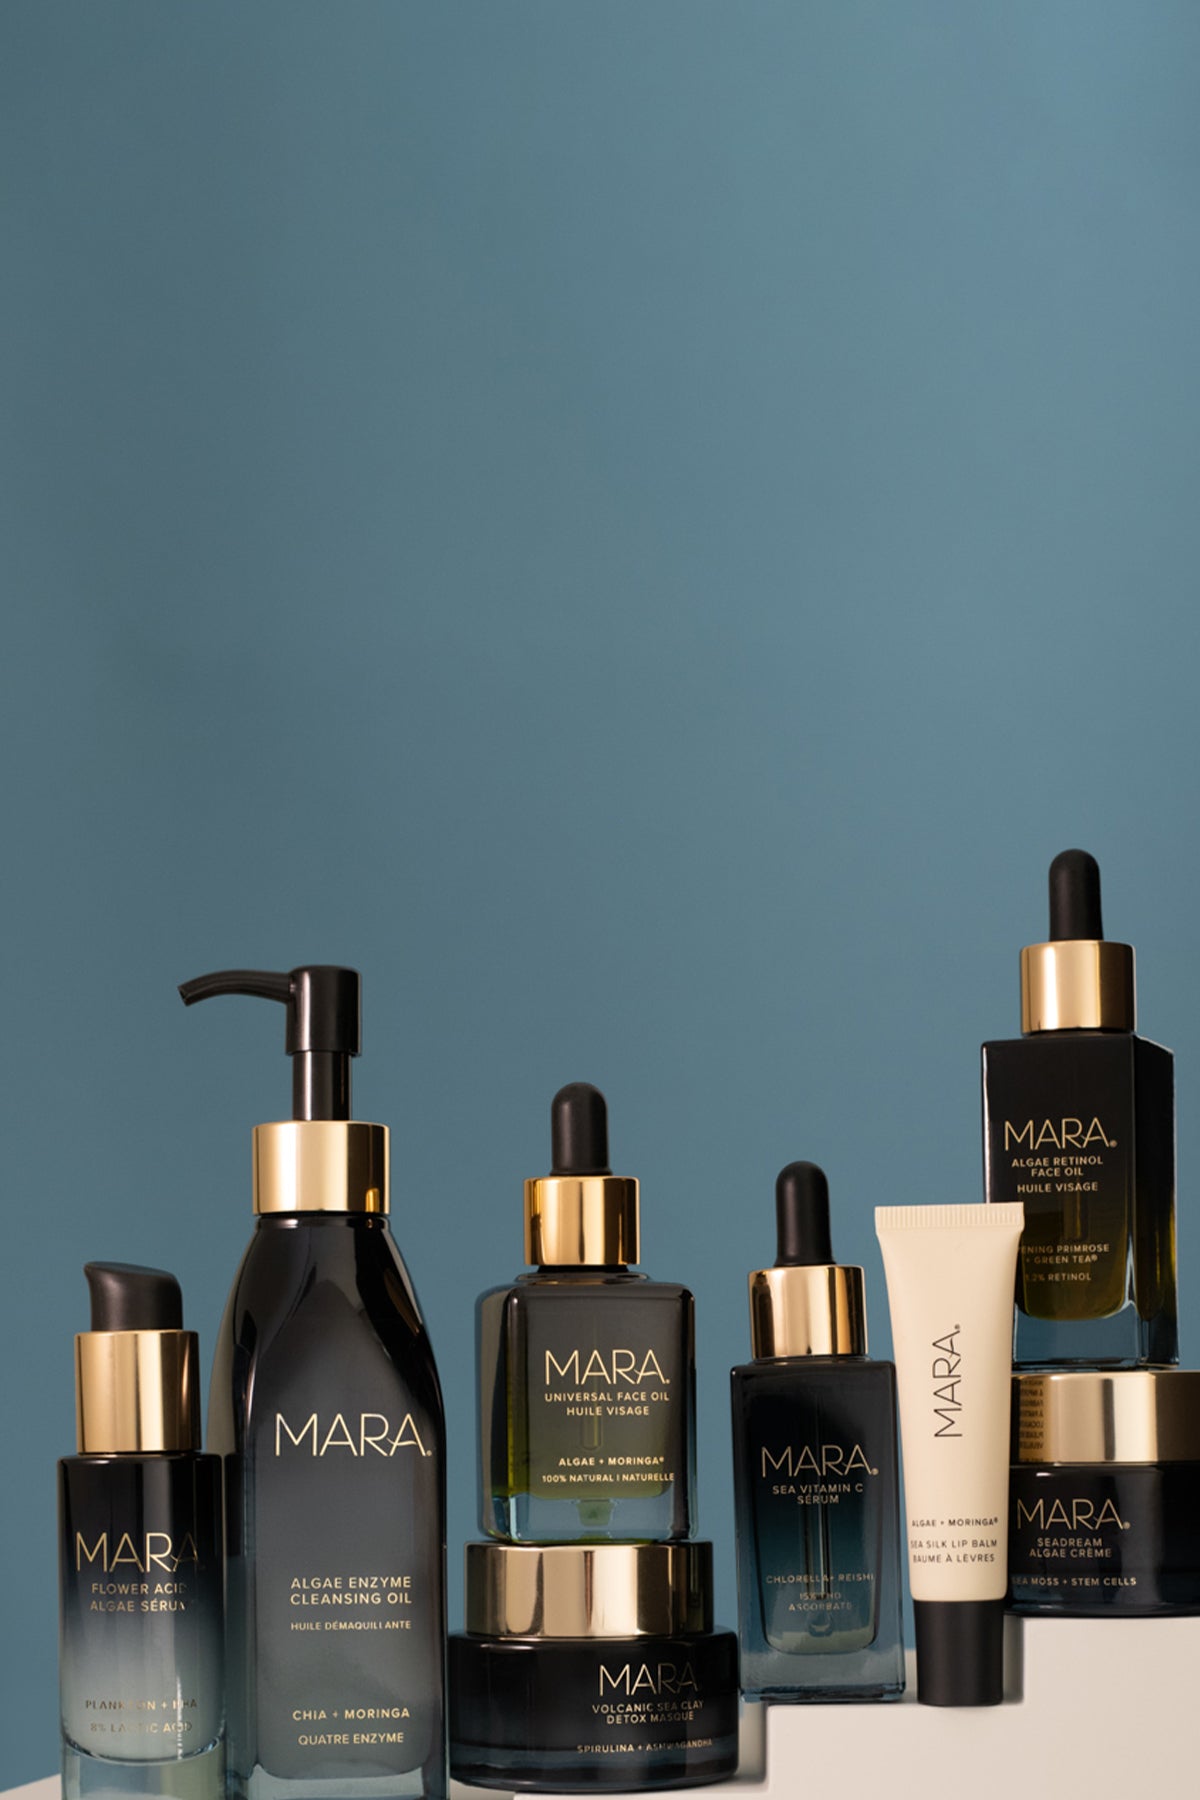 MARA products on little staircase shelf